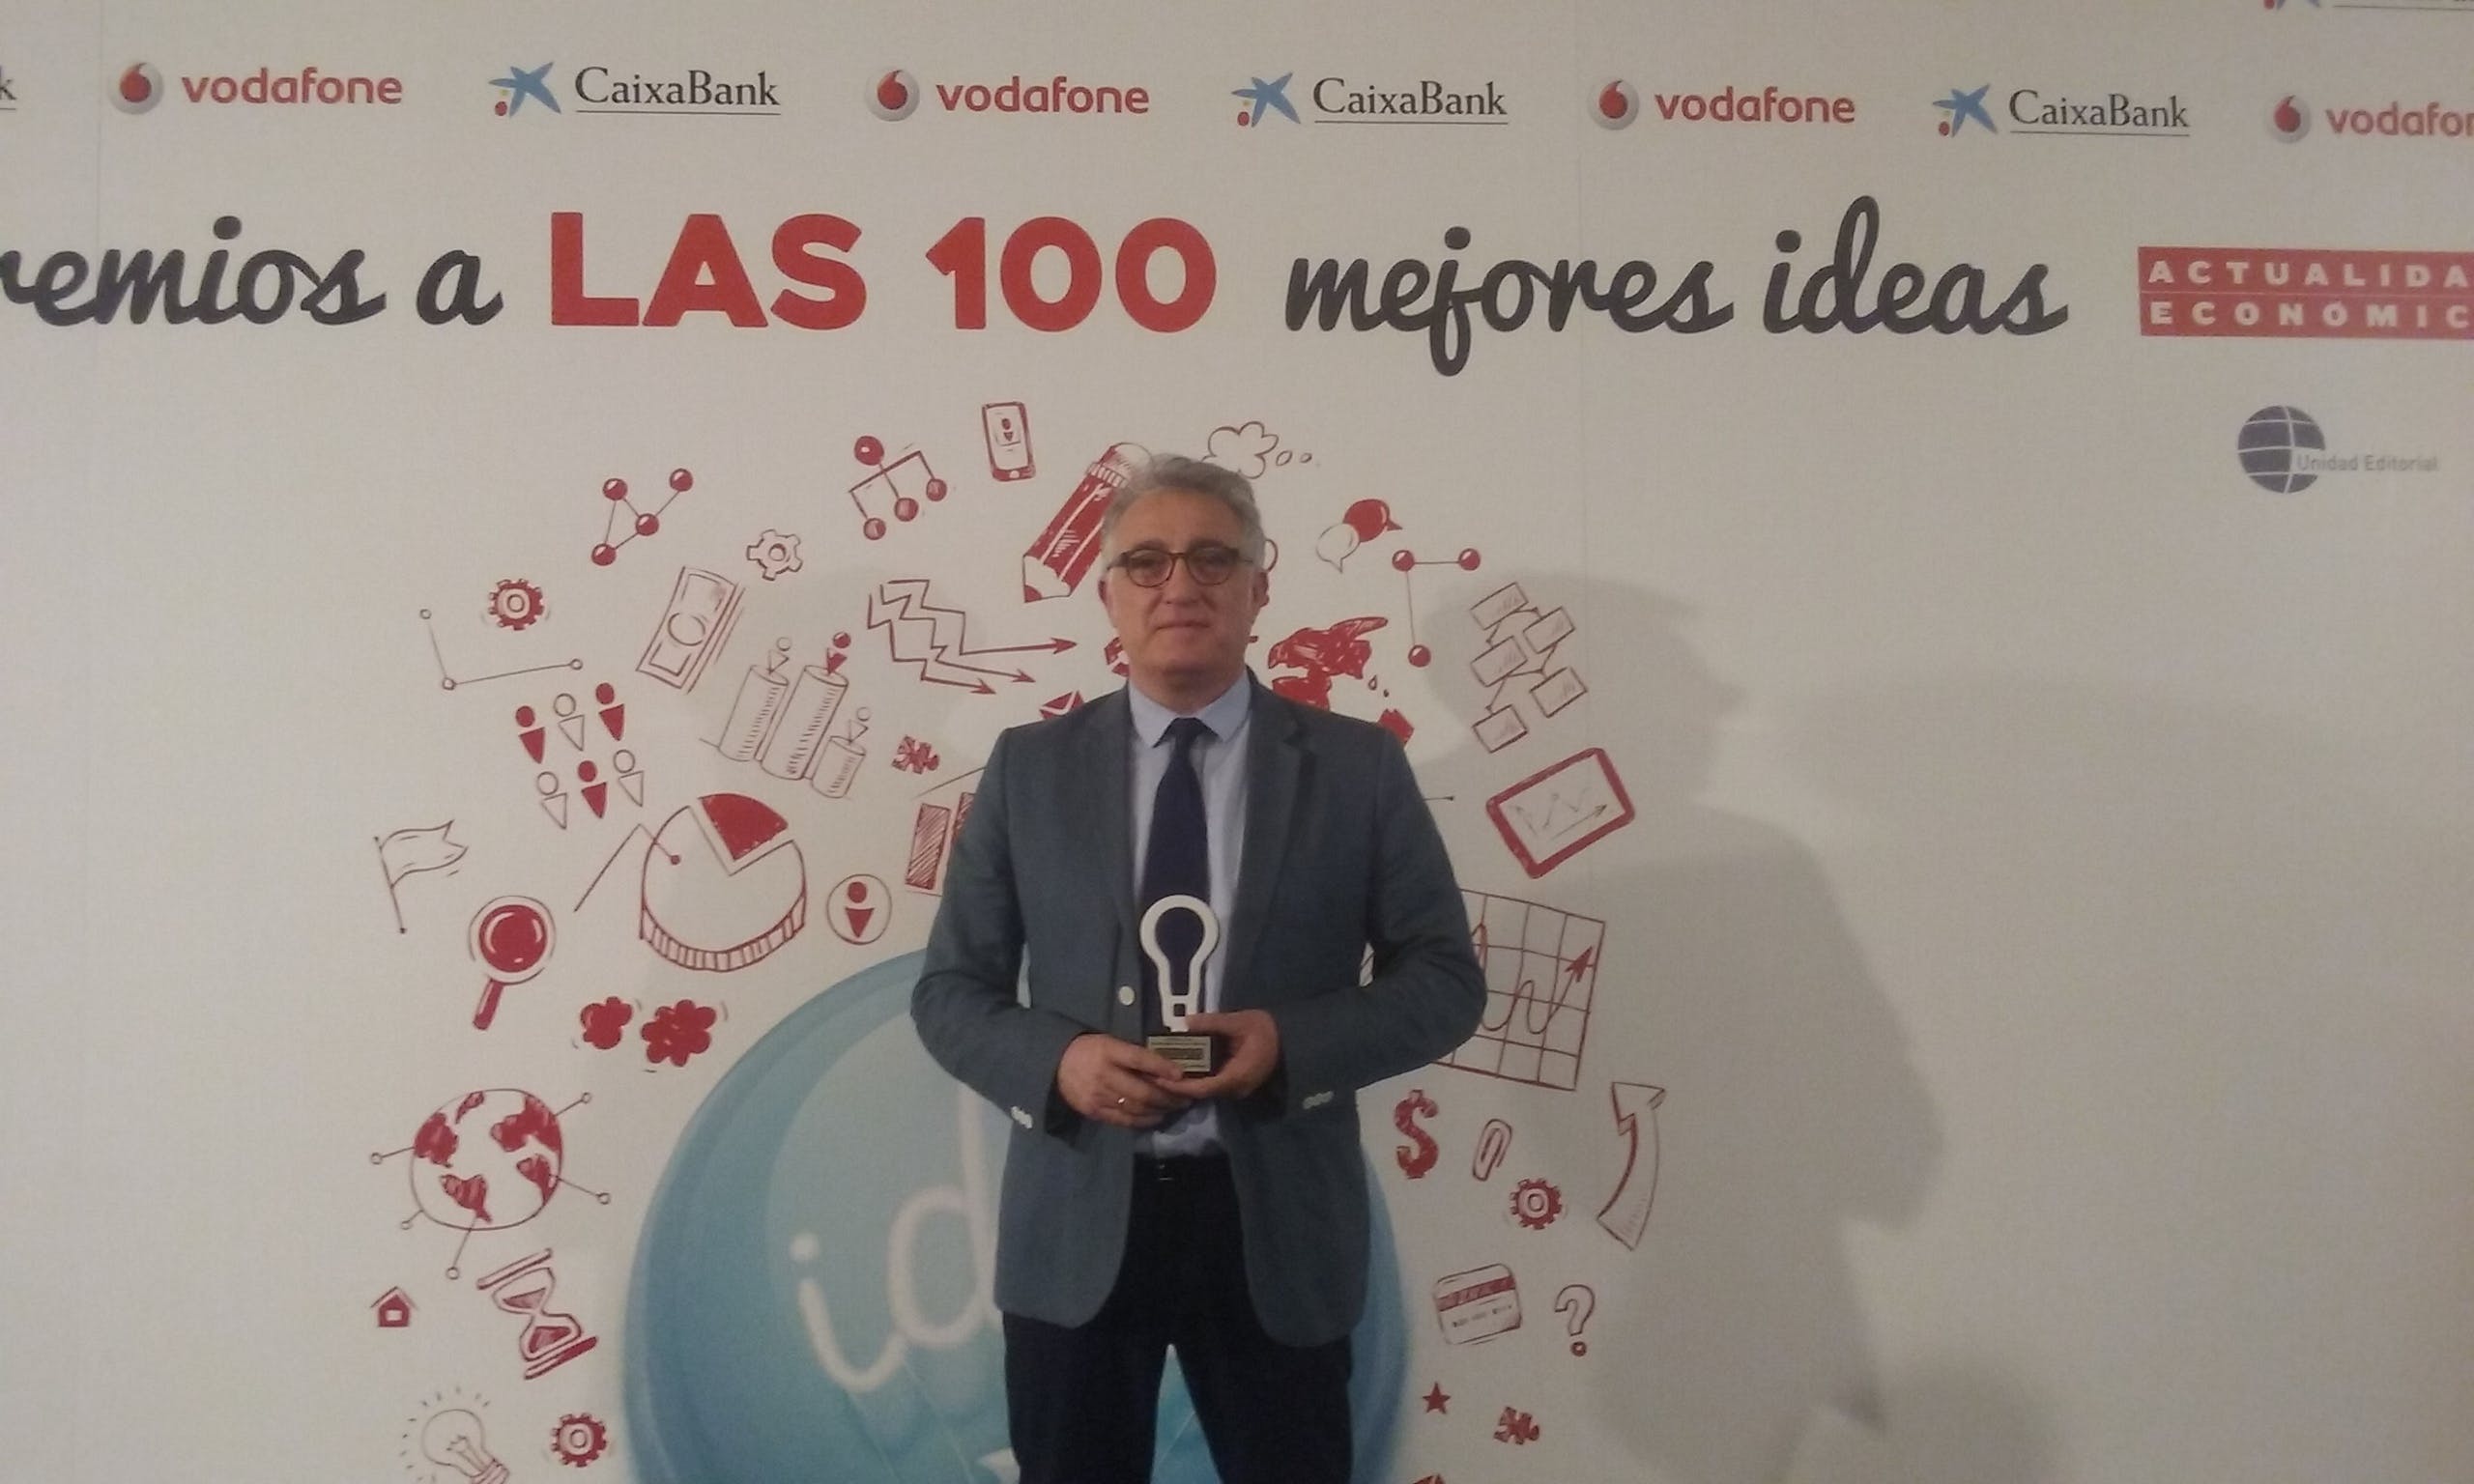 Image 33 of jose luis calleja recoge premio a las 100 mejores ideas cosentino 1 3 in Dekton® XGloss, among The 100 Best Business Ideas of 2016 by the magazine Actualidad Económica - Cosentino